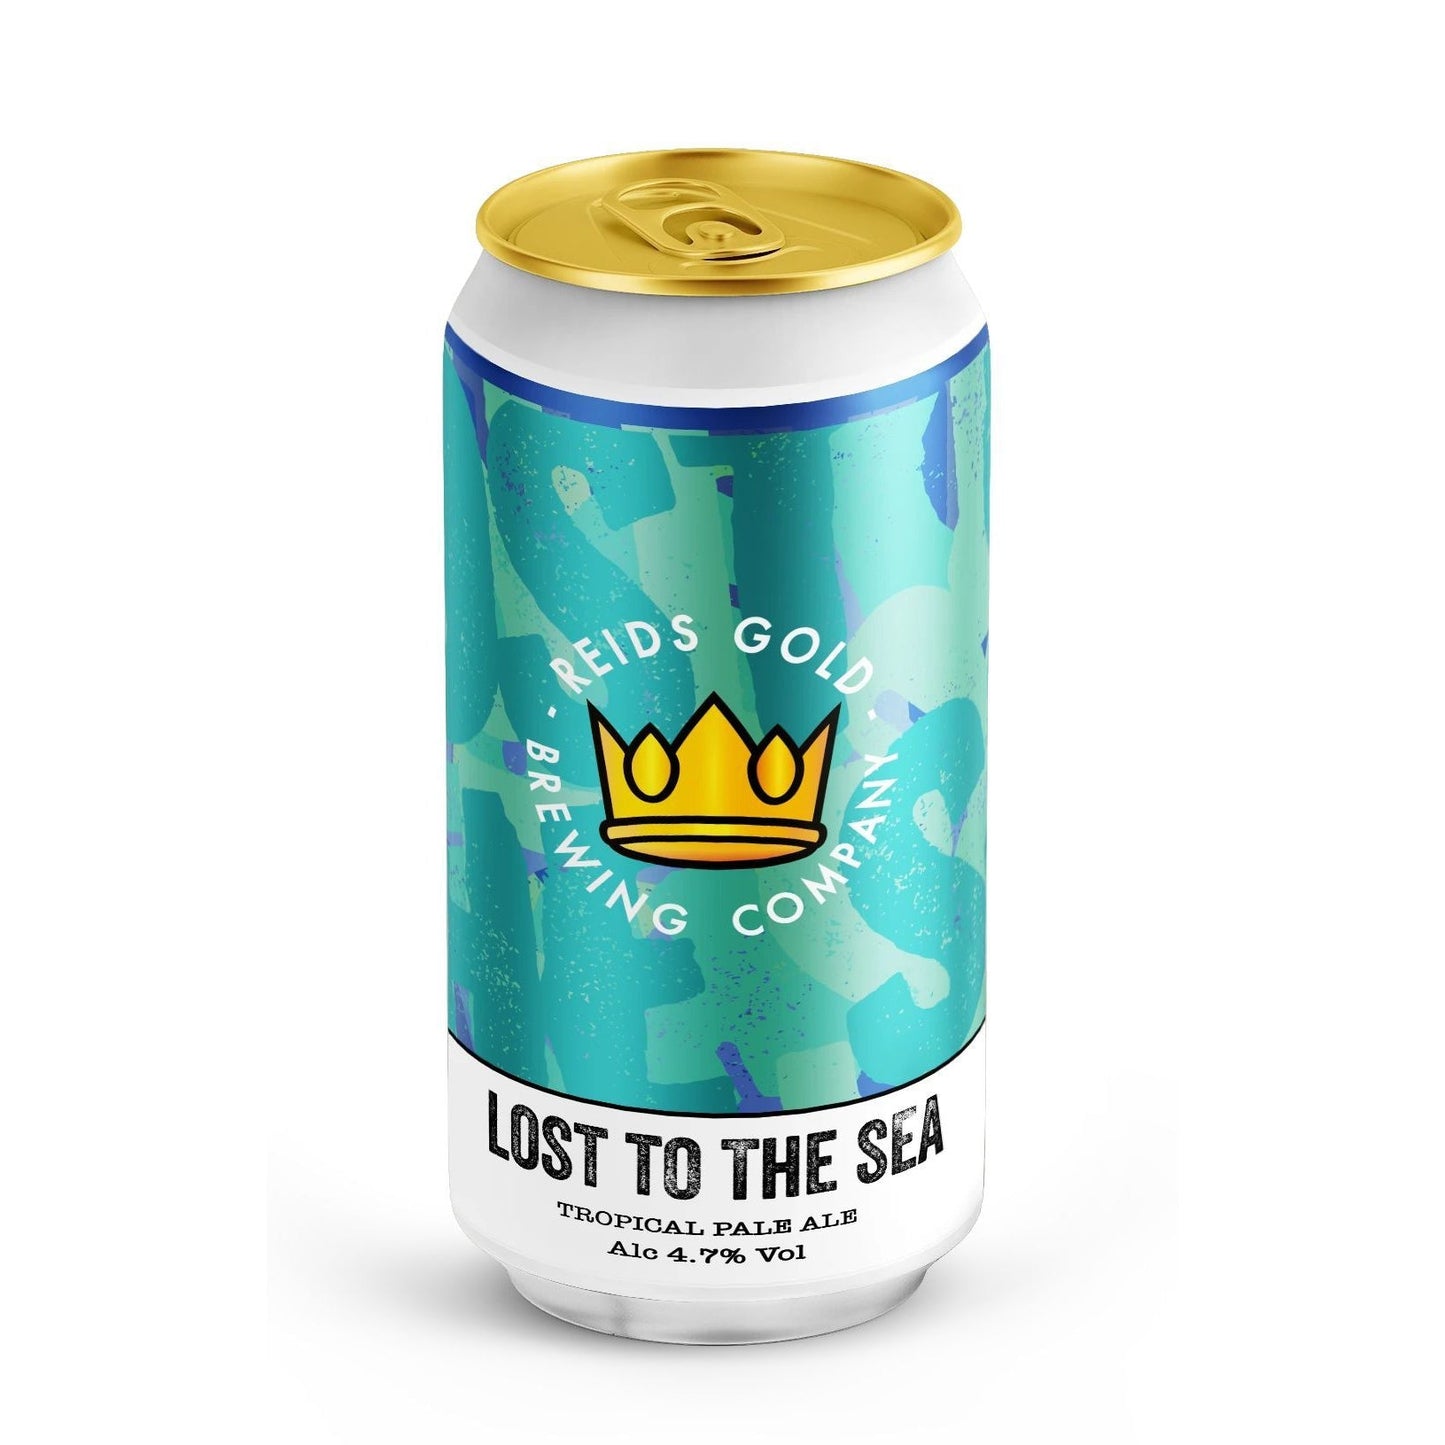 Reids Gold Lost To The Sea - Tropical Pale Ale 440ml-Scottish Beers-9502521796642-Fountainhall Wines